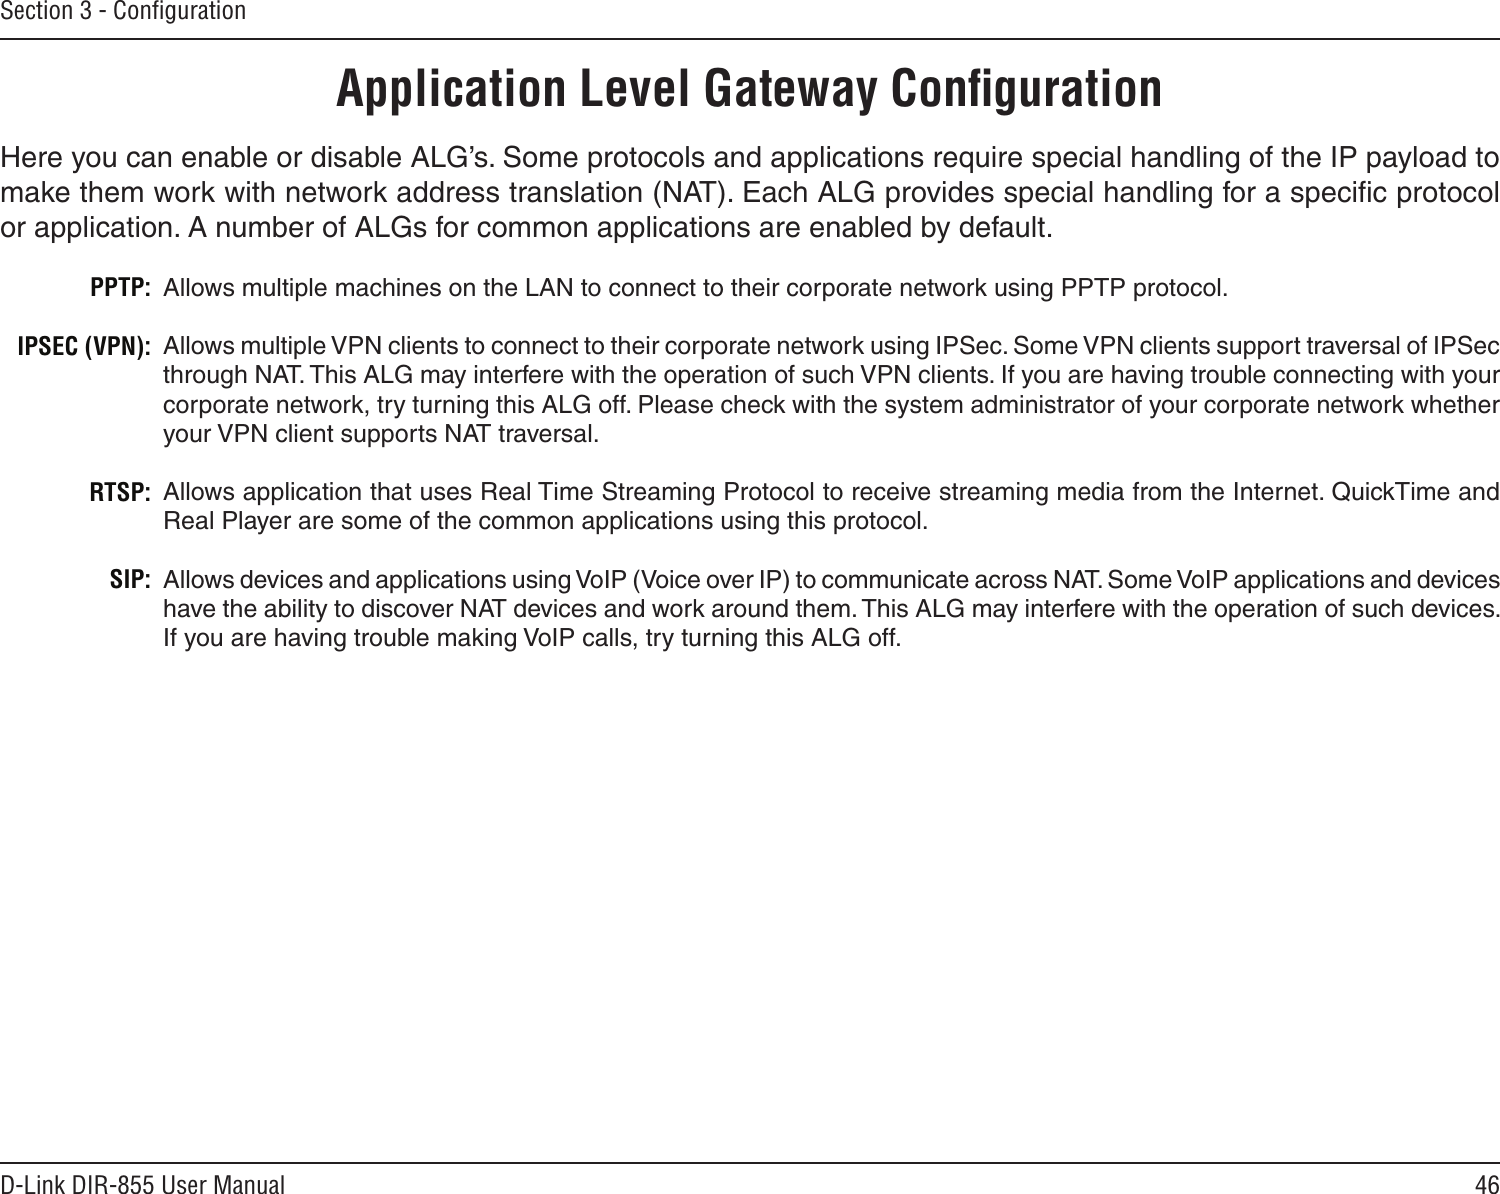 46D-Link DIR-855 User ManualSection 3 - ConﬁgurationApplication Level Gateway ConﬁgurationHere you can enable or disable ALG’s. Some protocols and applications require special handling of the IP payload to make them work with network address translation (NAT). Each ALG provides special handling for a speciﬁc protocol or application. A number of ALGs for common applications are enabled by default.Allows multiple machines on the LAN to connect to their corporate network using PPTP protocol. Allows multiple VPN clients to connect to their corporate network using IPSec. Some VPN clients support traversal of IPSec through NAT. This ALG may interfere with the operation of such VPN clients. If you are having trouble connecting with your corporate network, try turning this ALG off. Please check with the system administrator of your corporate network whether your VPN client supports NAT traversal.Allows application that uses Real Time Streaming Protocol to receive streaming media from the Internet. QuickTime and Real Player are some of the common applications using this protocol.Allows devices and applications using VoIP (Voice over IP) to communicate across NAT. Some VoIP applications and devices have the ability to discover NAT devices and work around them. This ALG may interfere with the operation of such devices. If you are having trouble making VoIP calls, try turning this ALG off.PPTP:IPSEC (VPN):RTSP:SIP: